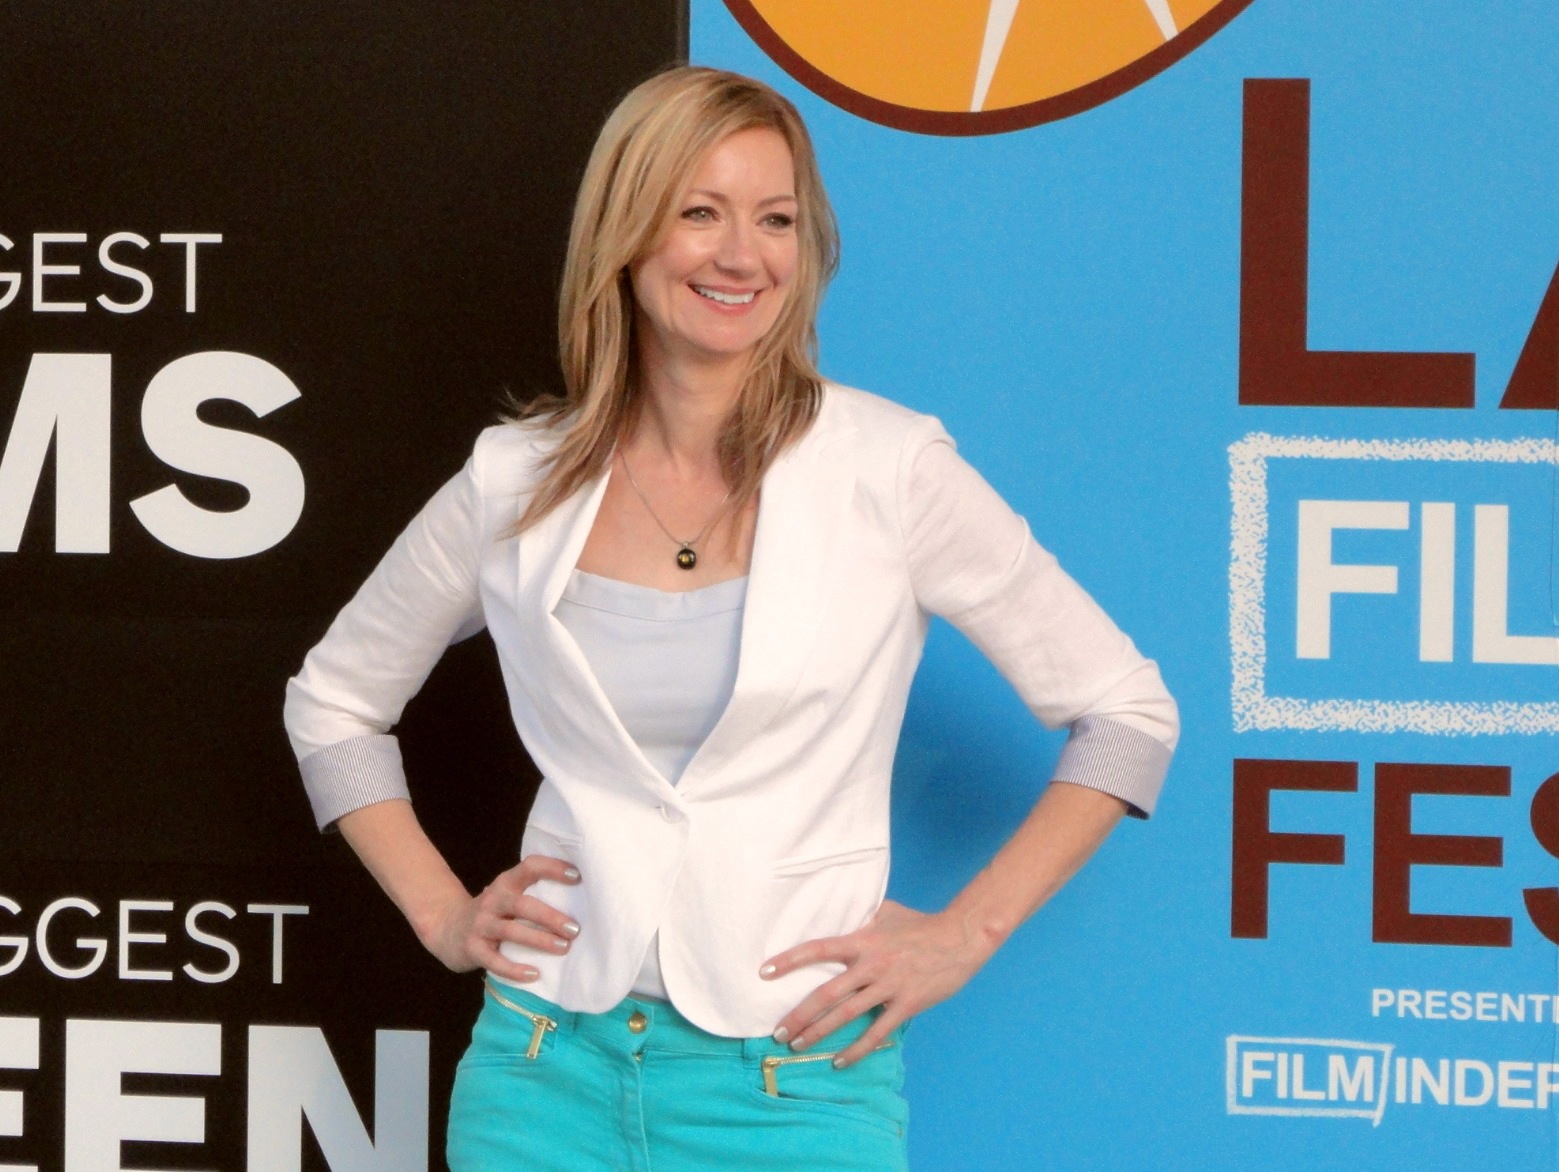 Kathleen McNearney at The Los Angeles Film Festival.